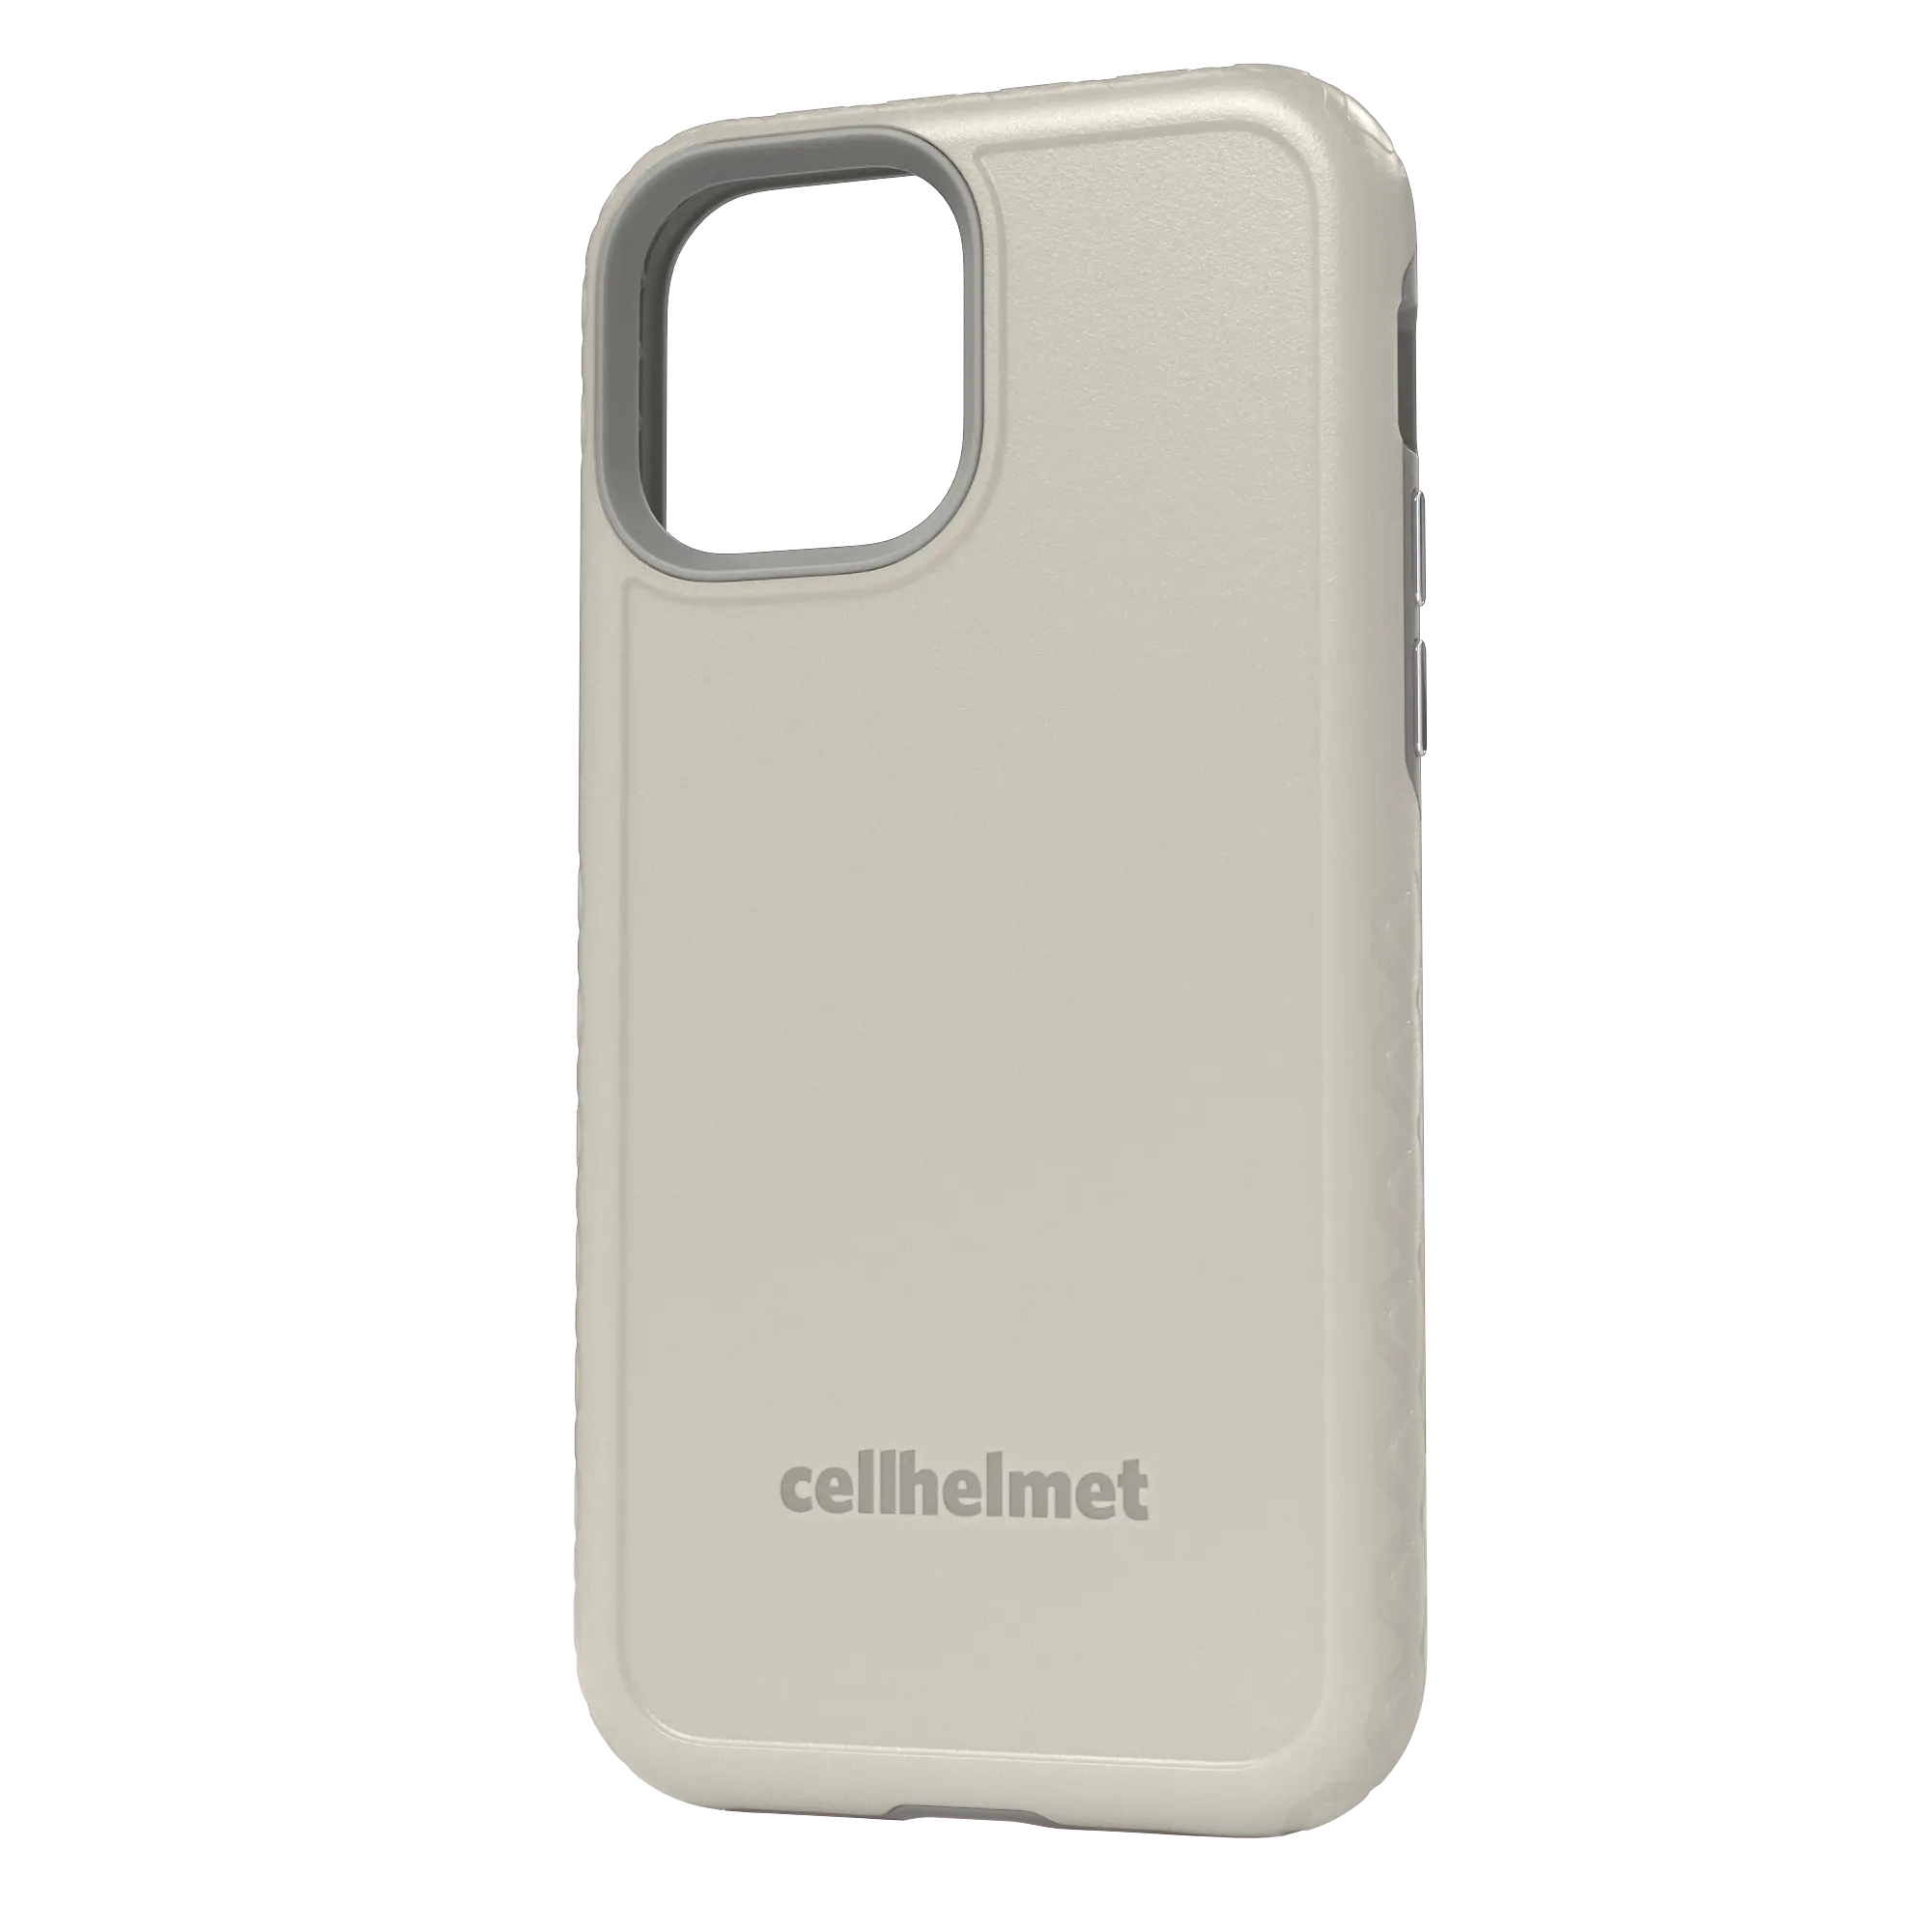 Gray cellhelmet Personalized Case for iPhone 12 Pro